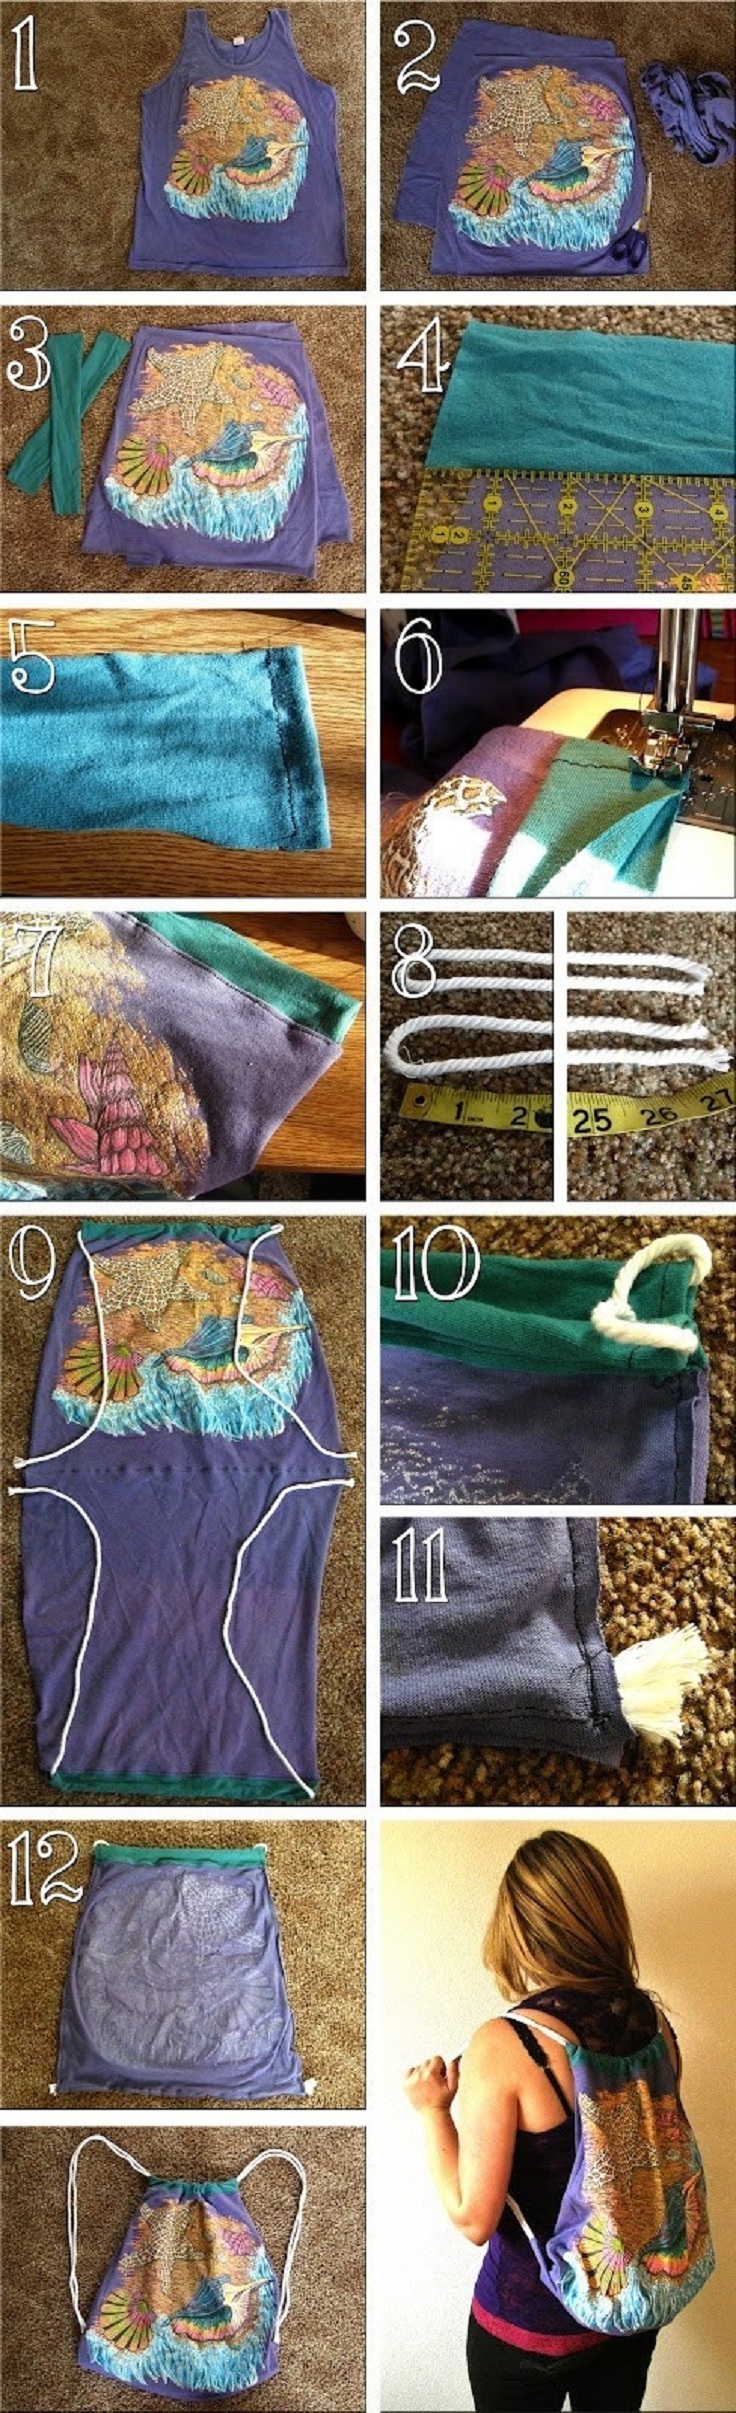 sewing-projects_08